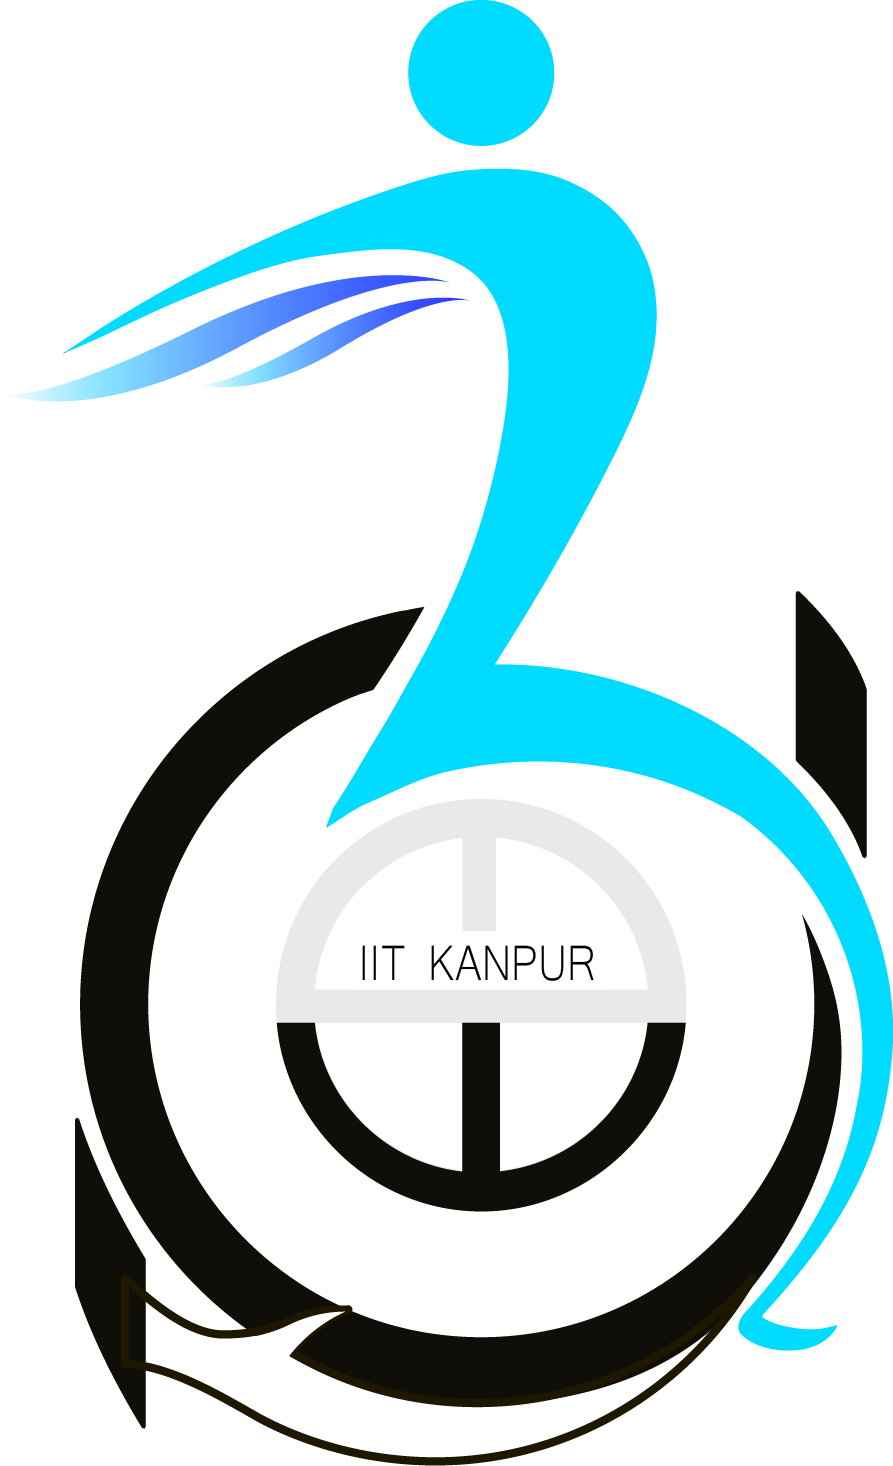 IIT Kanpur startups incubation innovation centre India